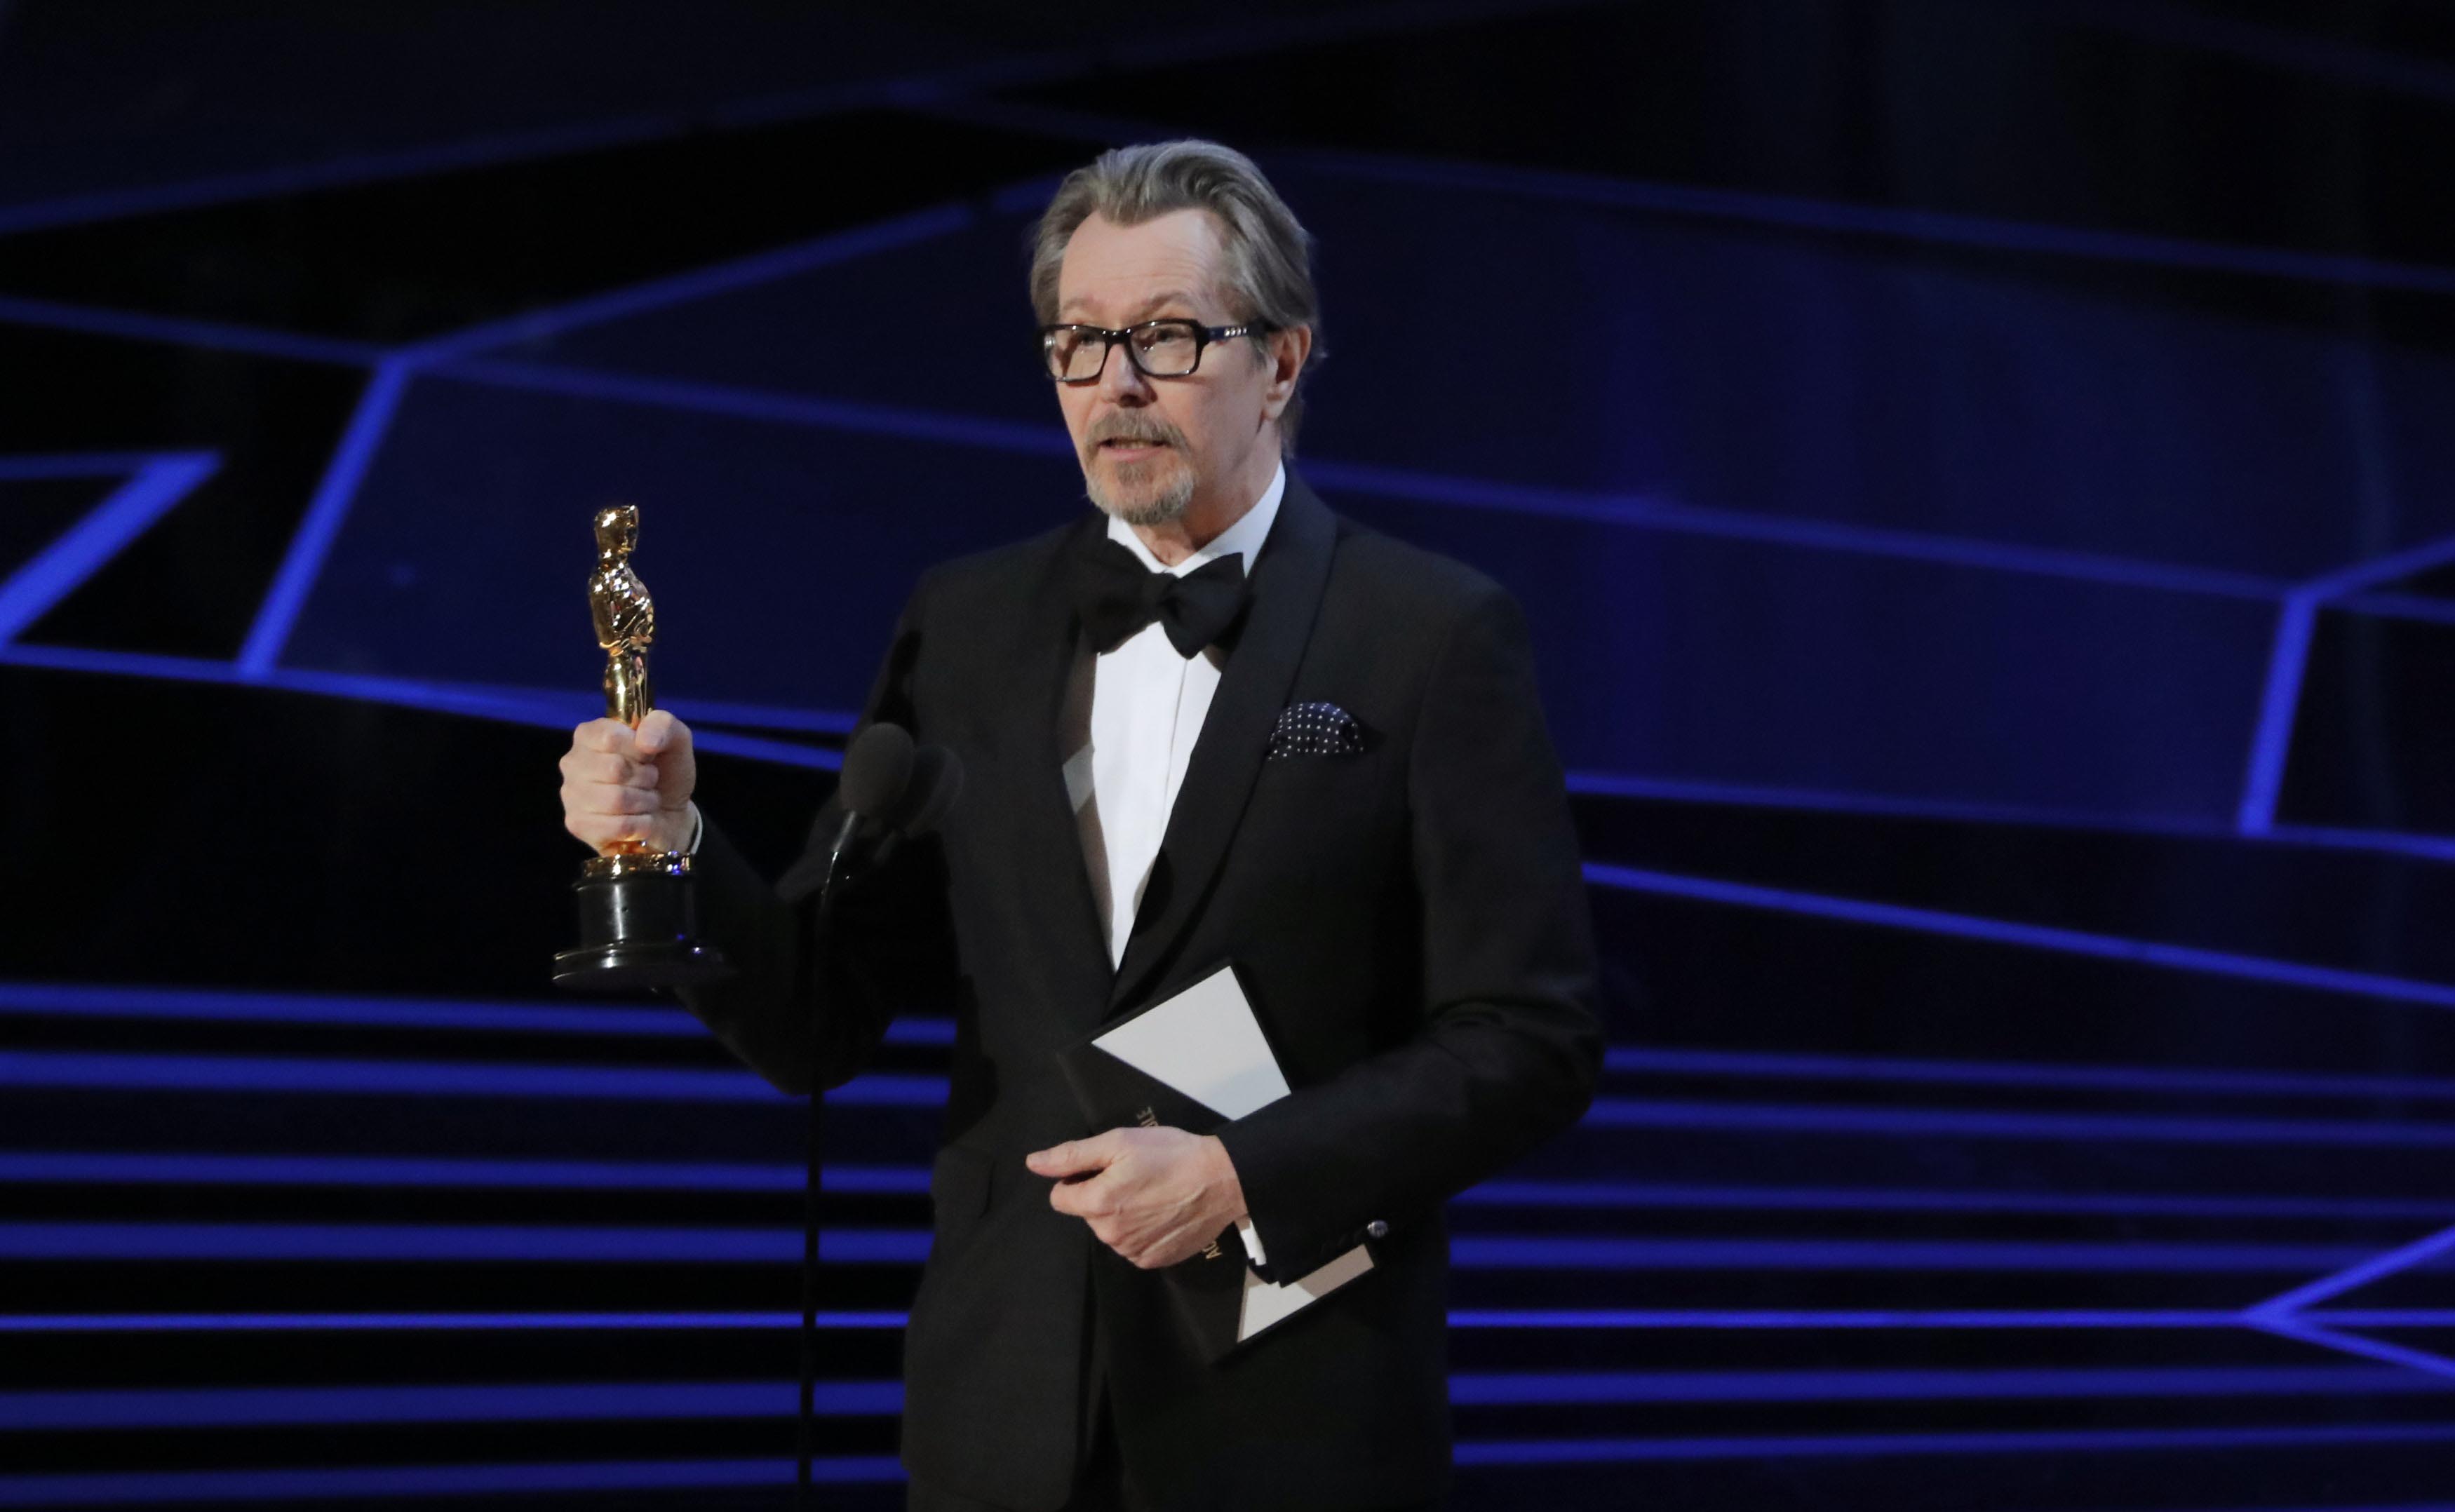 Gary Oldman wearing a black suit while holding an Oscar award trophy